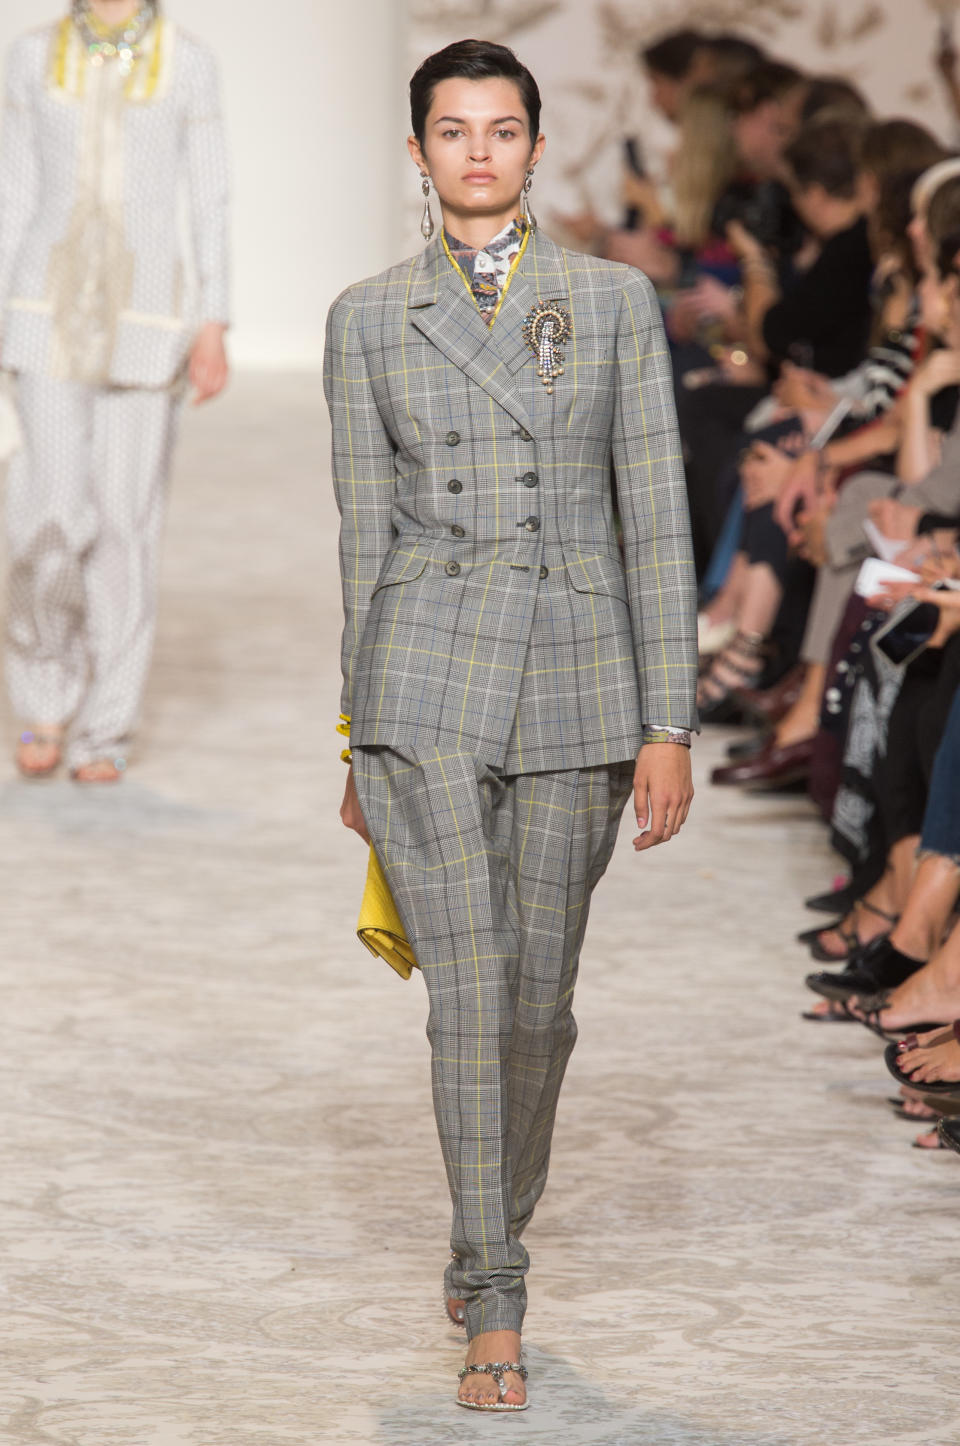 <p><i>Model wears a gray and yellow plaid suit with statement brooch and earrings from the SS18 Etro collection. (Photo: ImaxTree) </i></p>